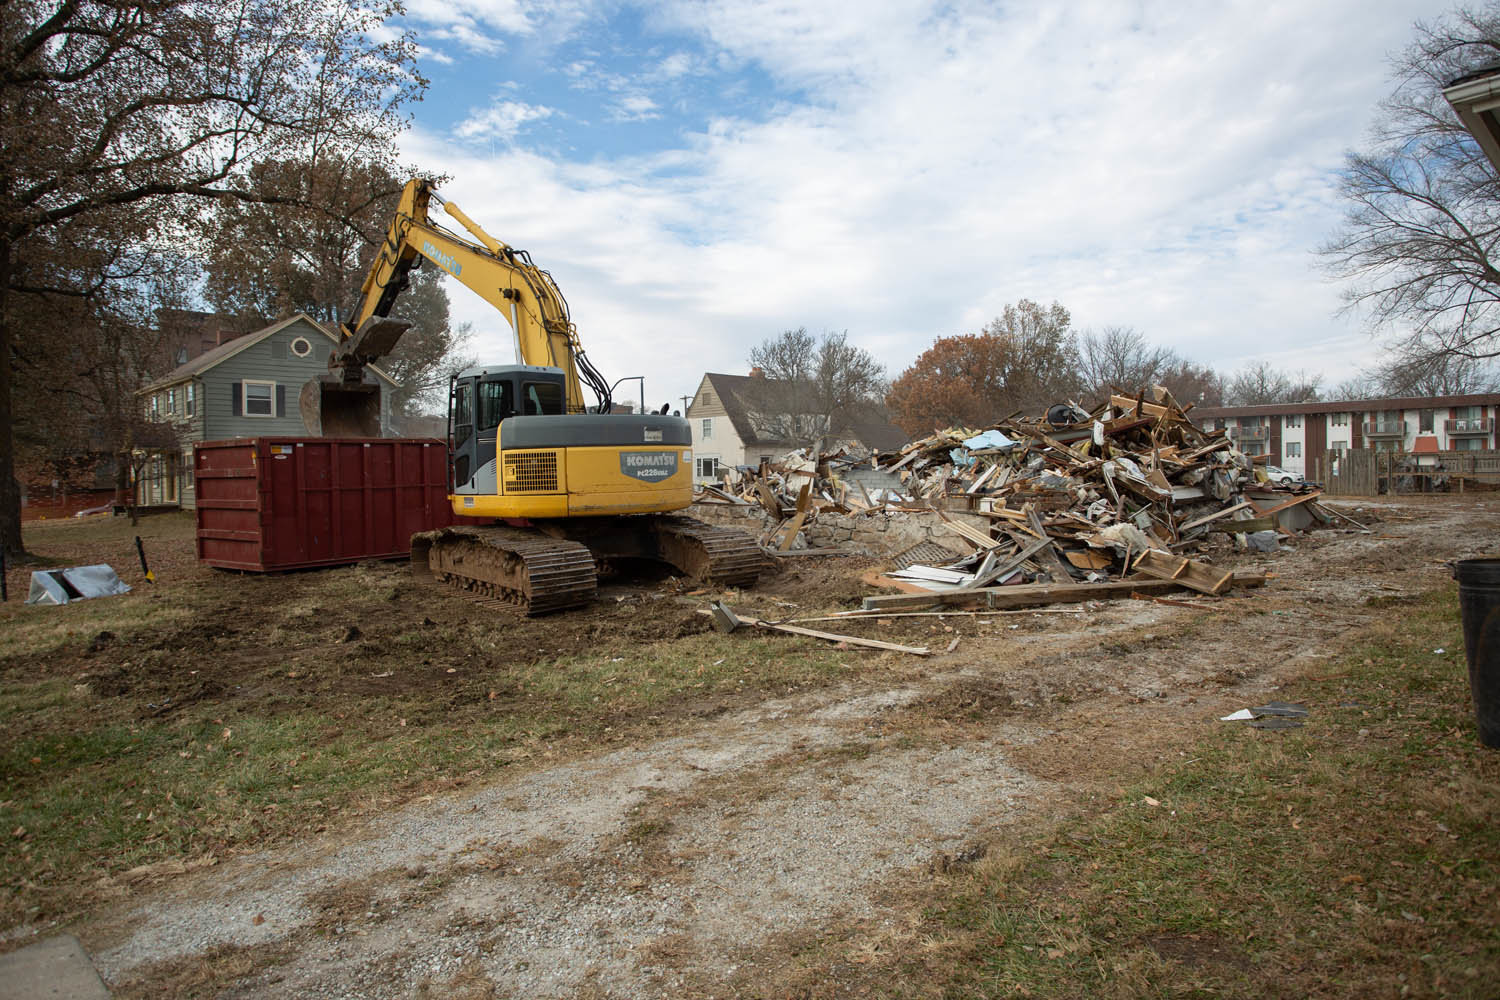 Several houses on East Cherry Street have been demolished to accommodate a residential development.